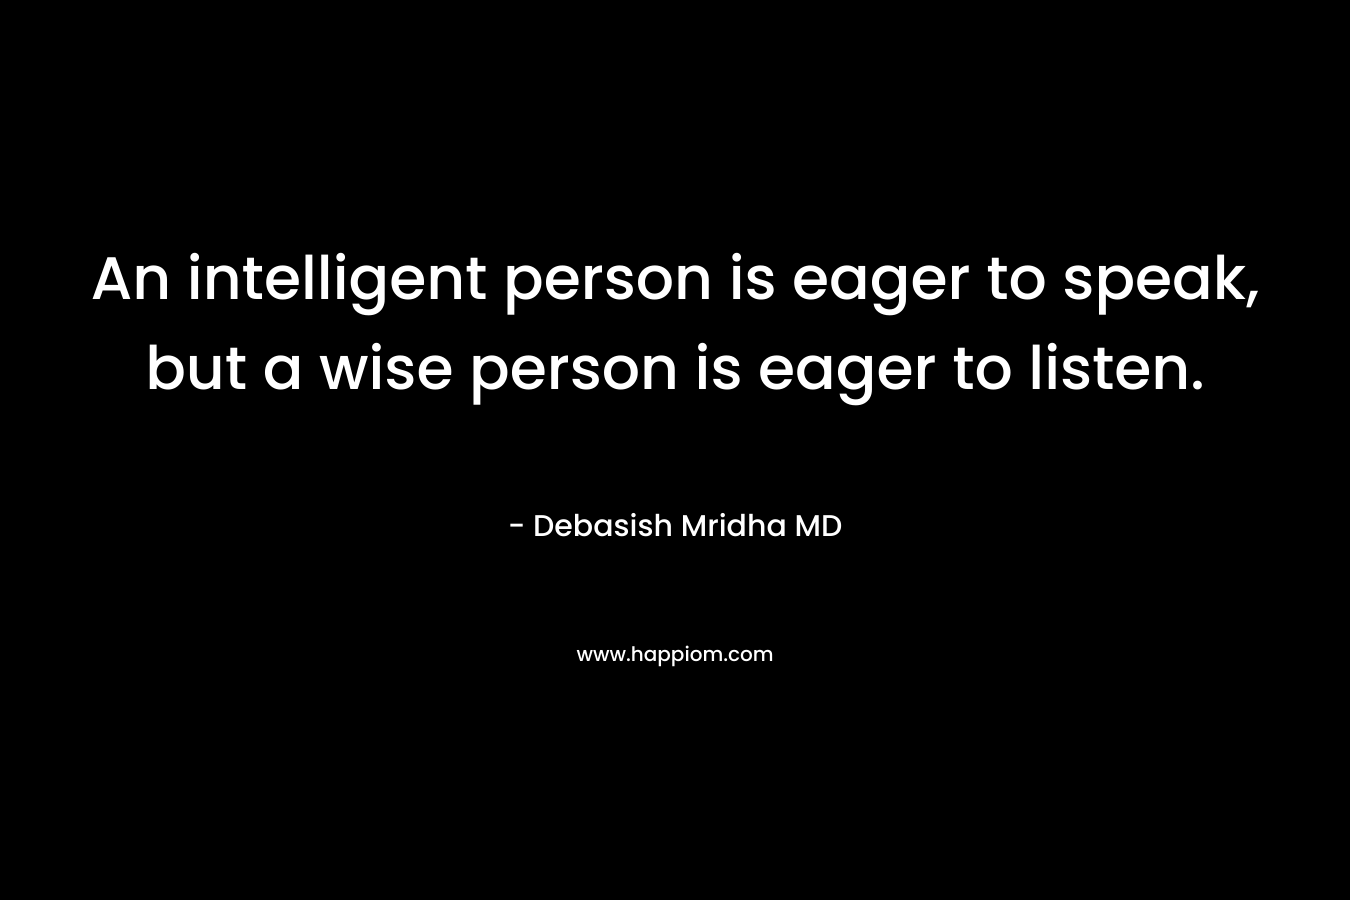 An intelligent person is eager to speak, but a wise person is eager to listen.